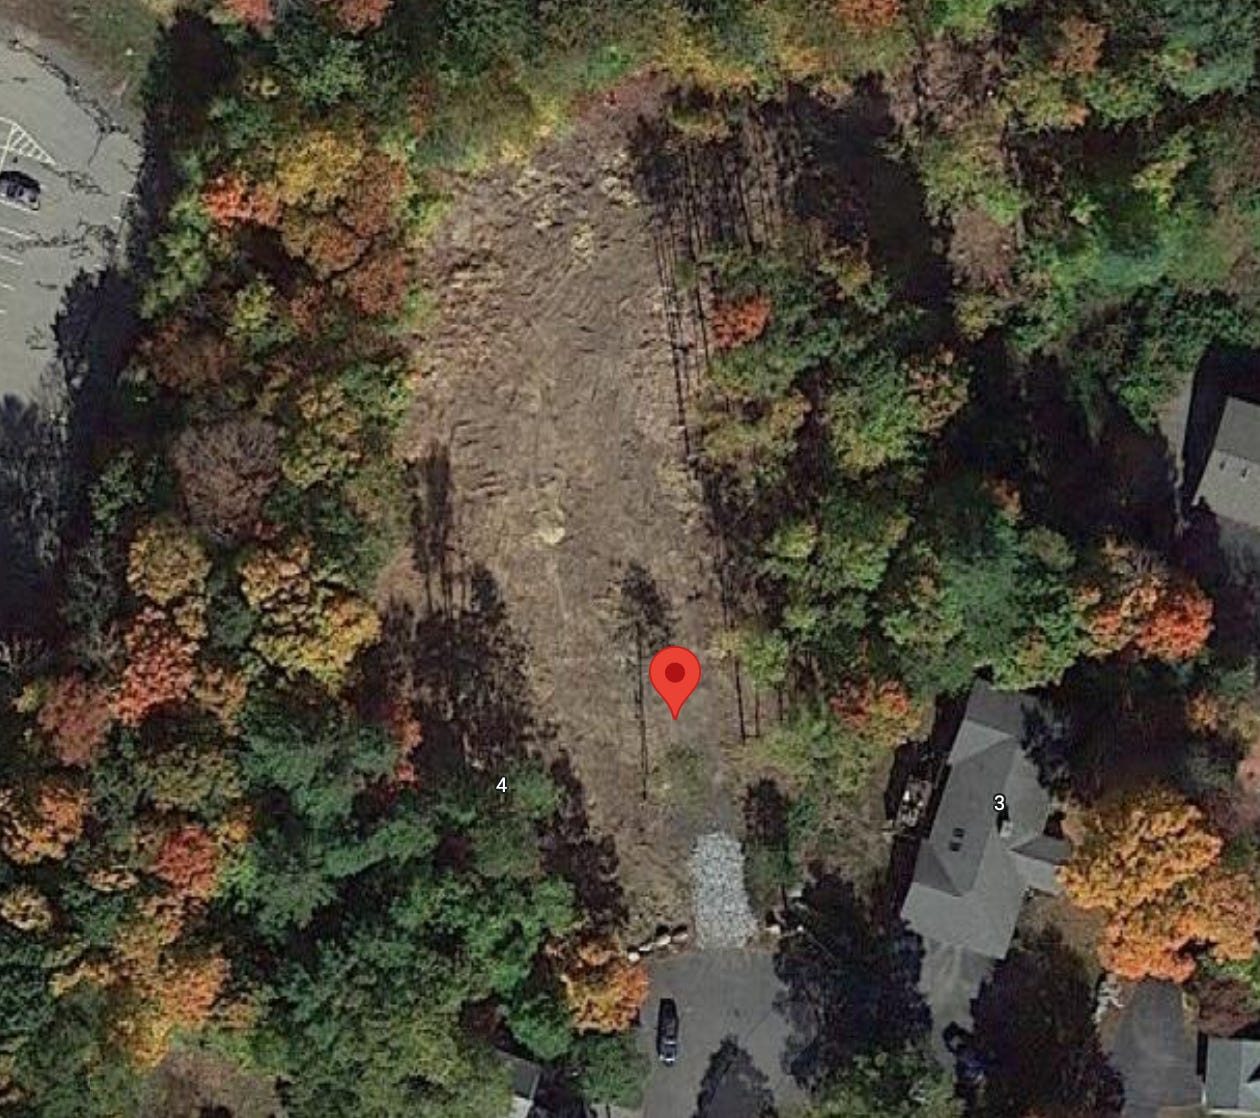 A screenshot of the Google Maps aerial photo of the target location which shows a clearing but not building or flag